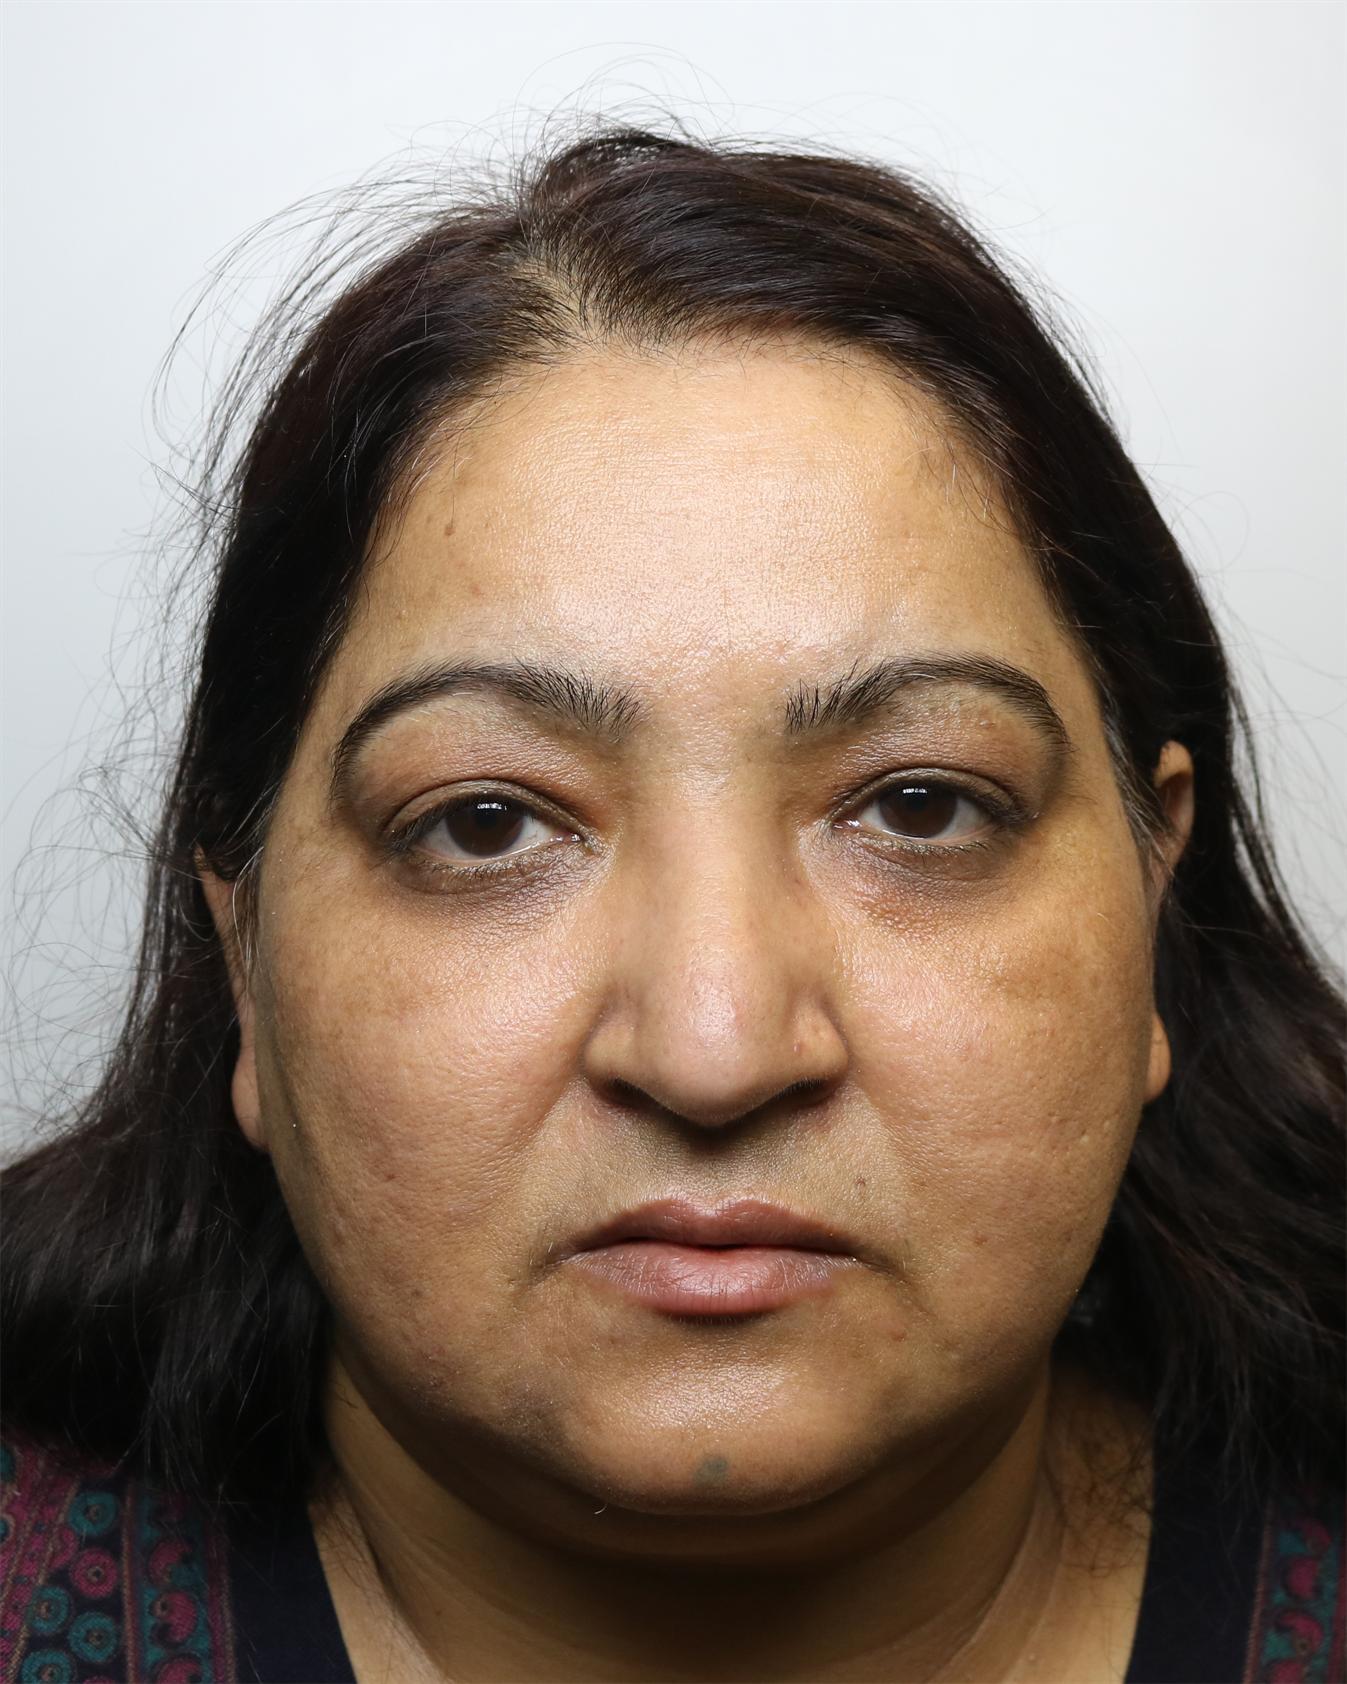 On Wednesday, Asgar Sheikh’s mother, Shabnam Sheikh, 52, was jailed for seven years and nine months